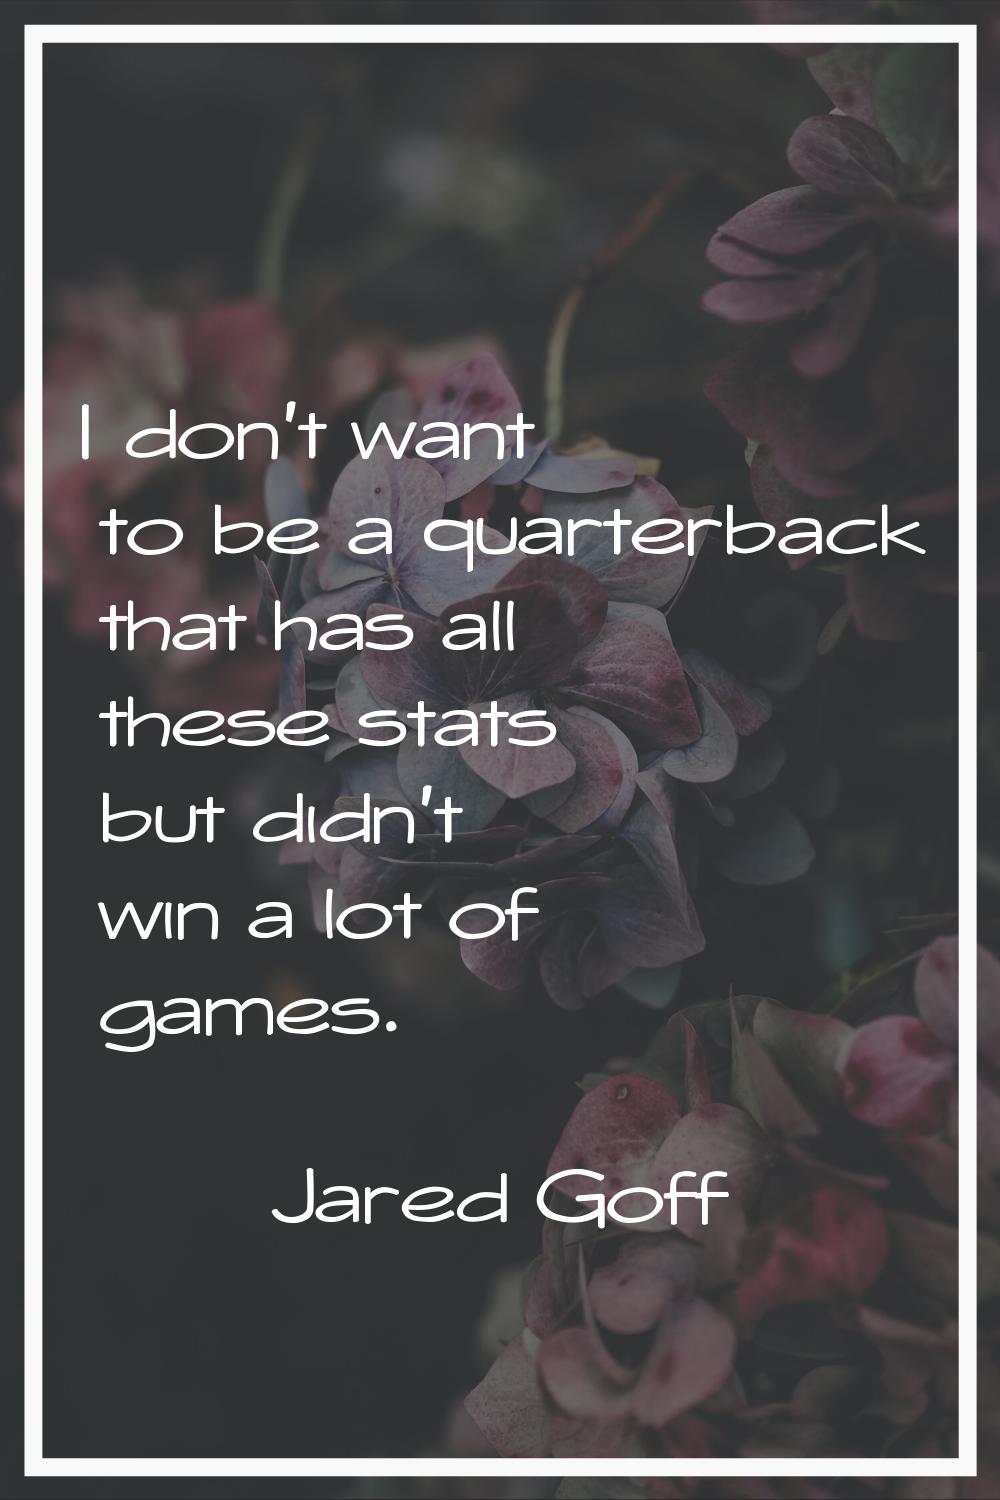 I don't want to be a quarterback that has all these stats but didn't win a lot of games.